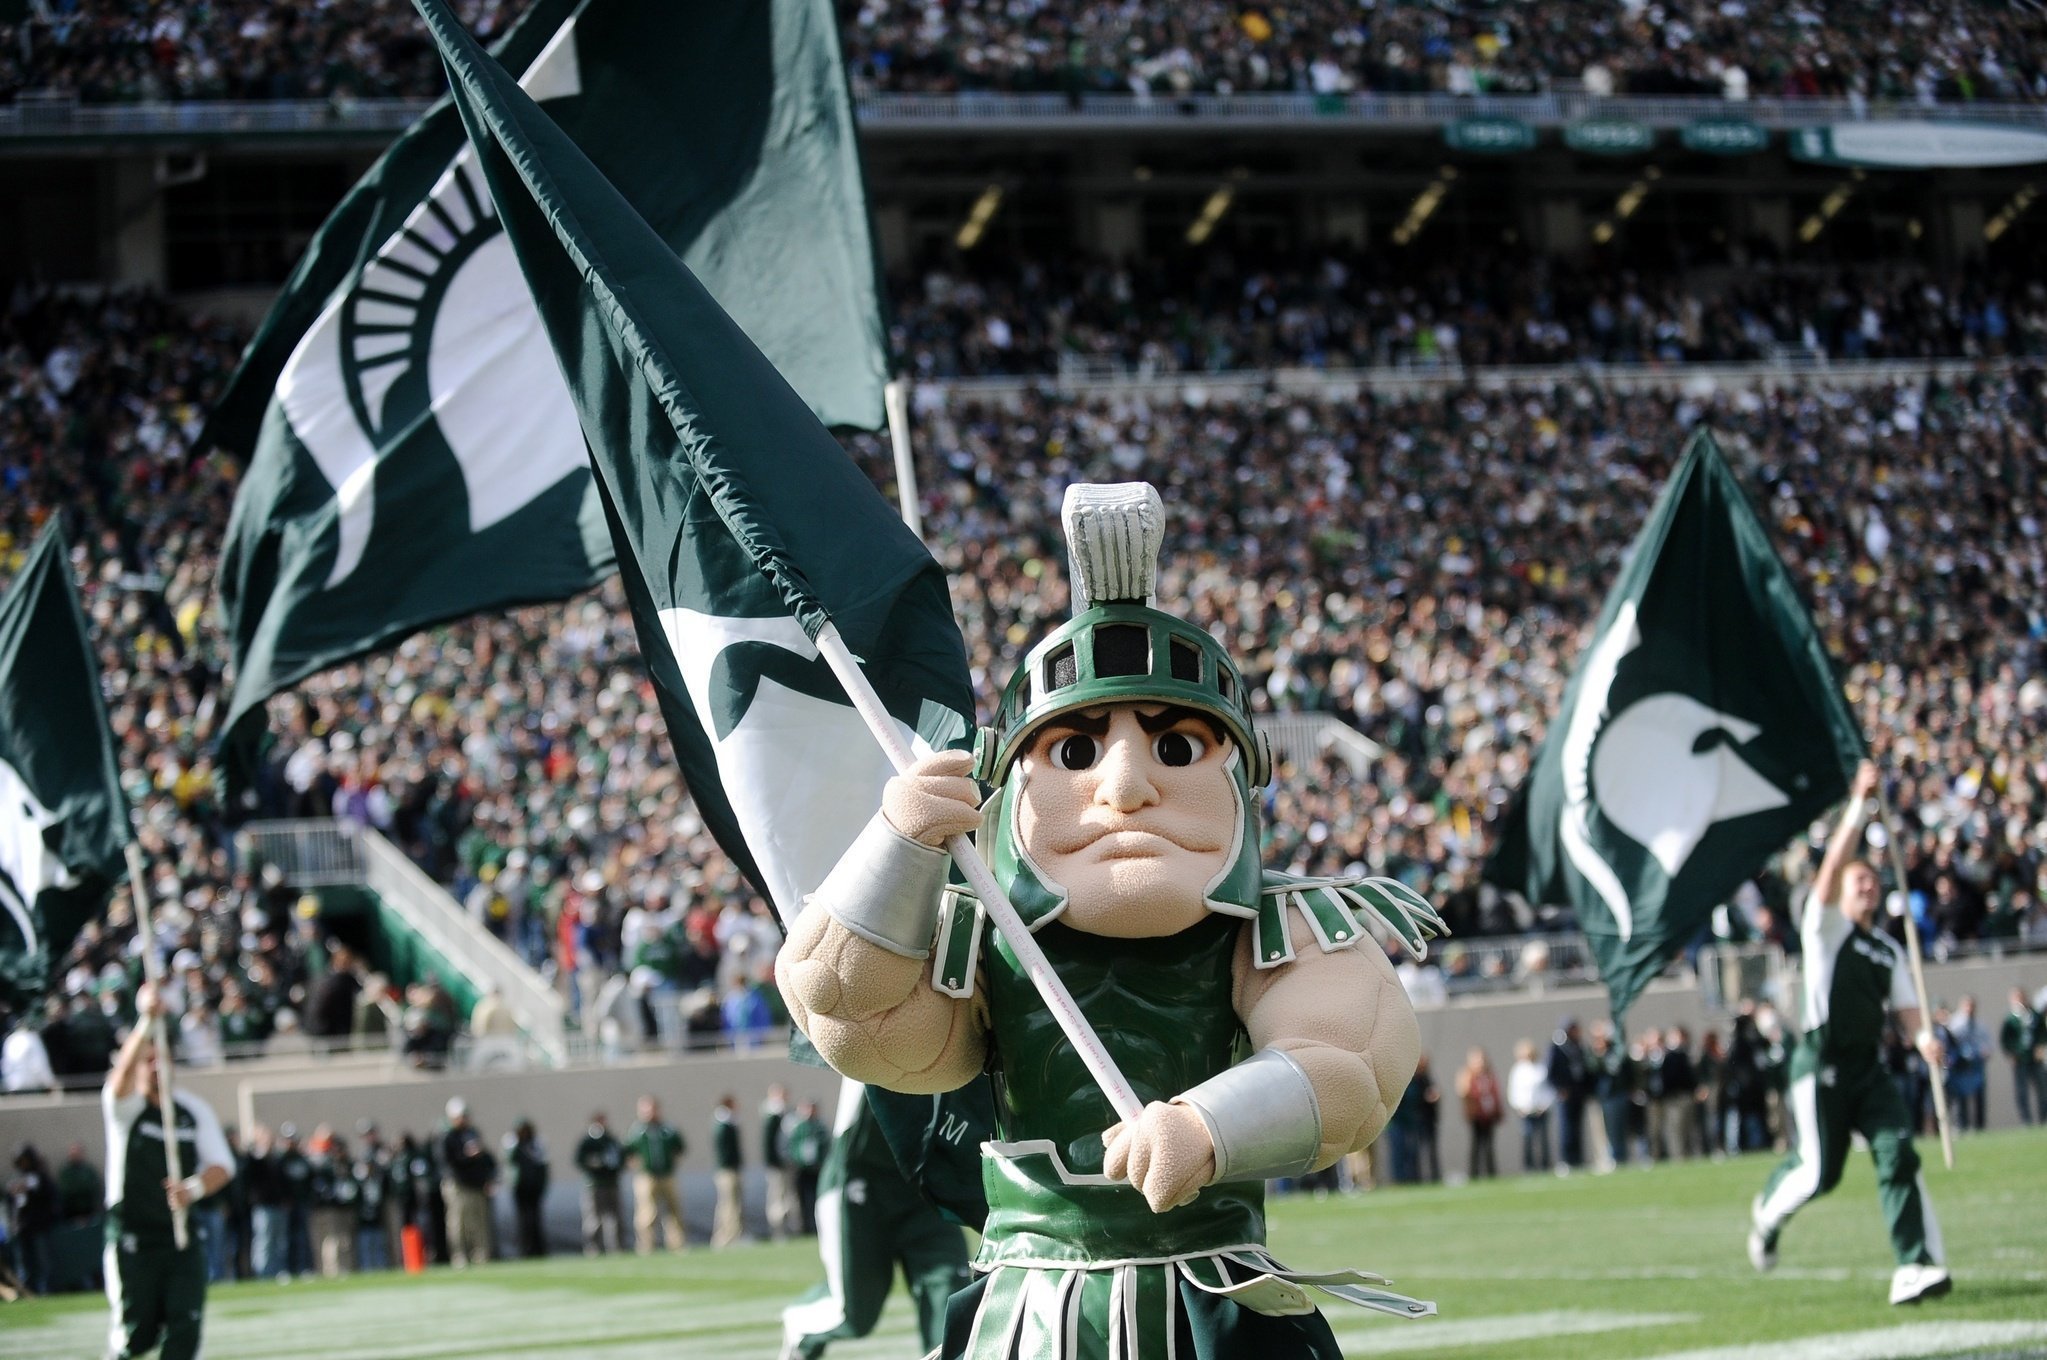 Michigan State football season tickets will require additional